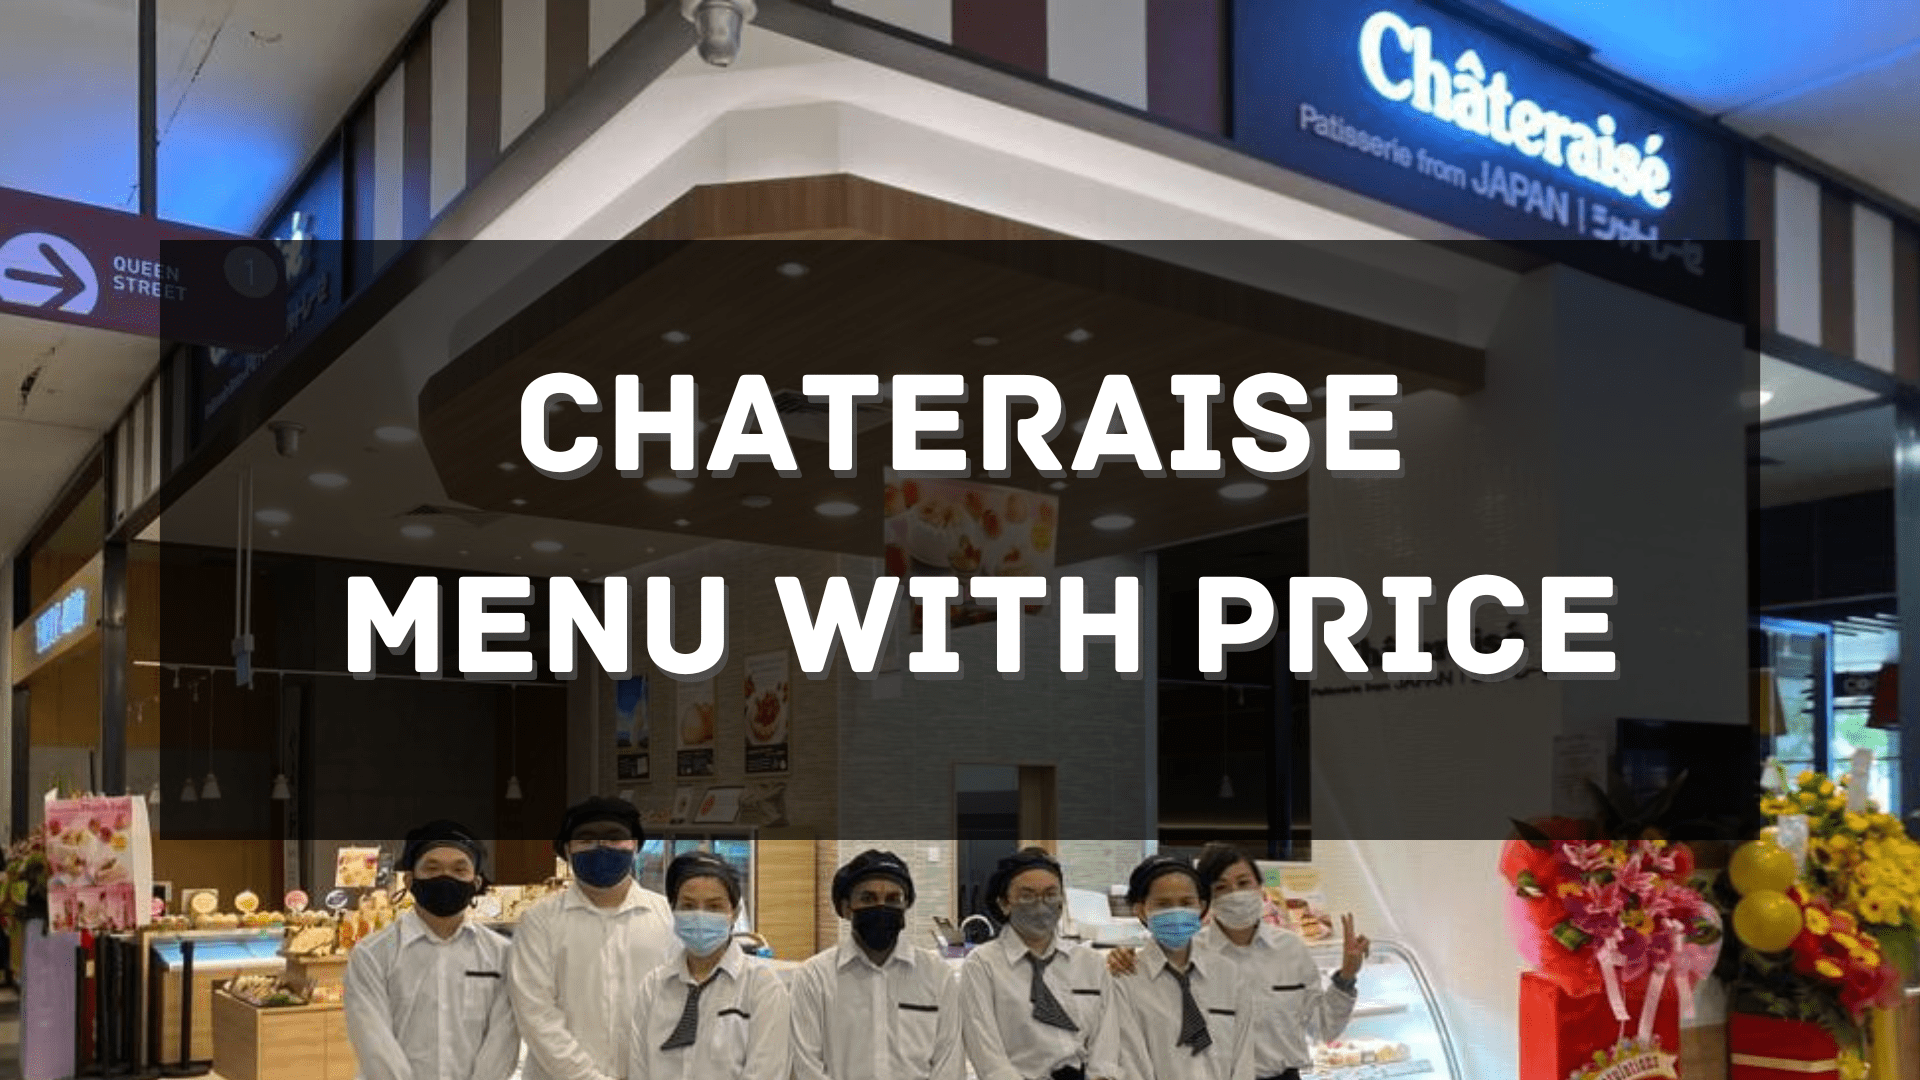 Chateraise Menu with Price Singapore